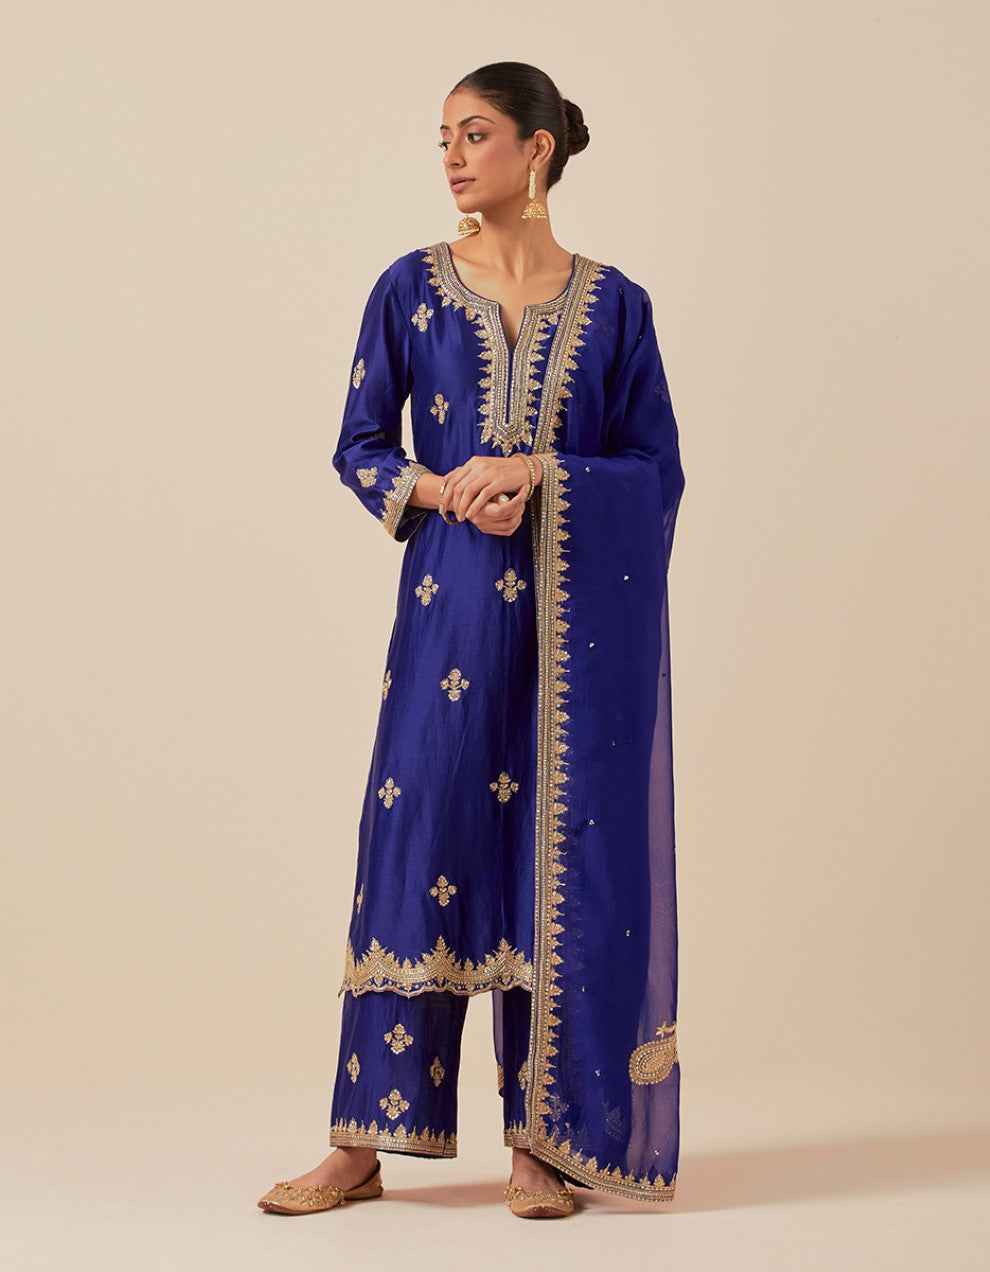 Blue hand embroidered kurta with pants and dupatta